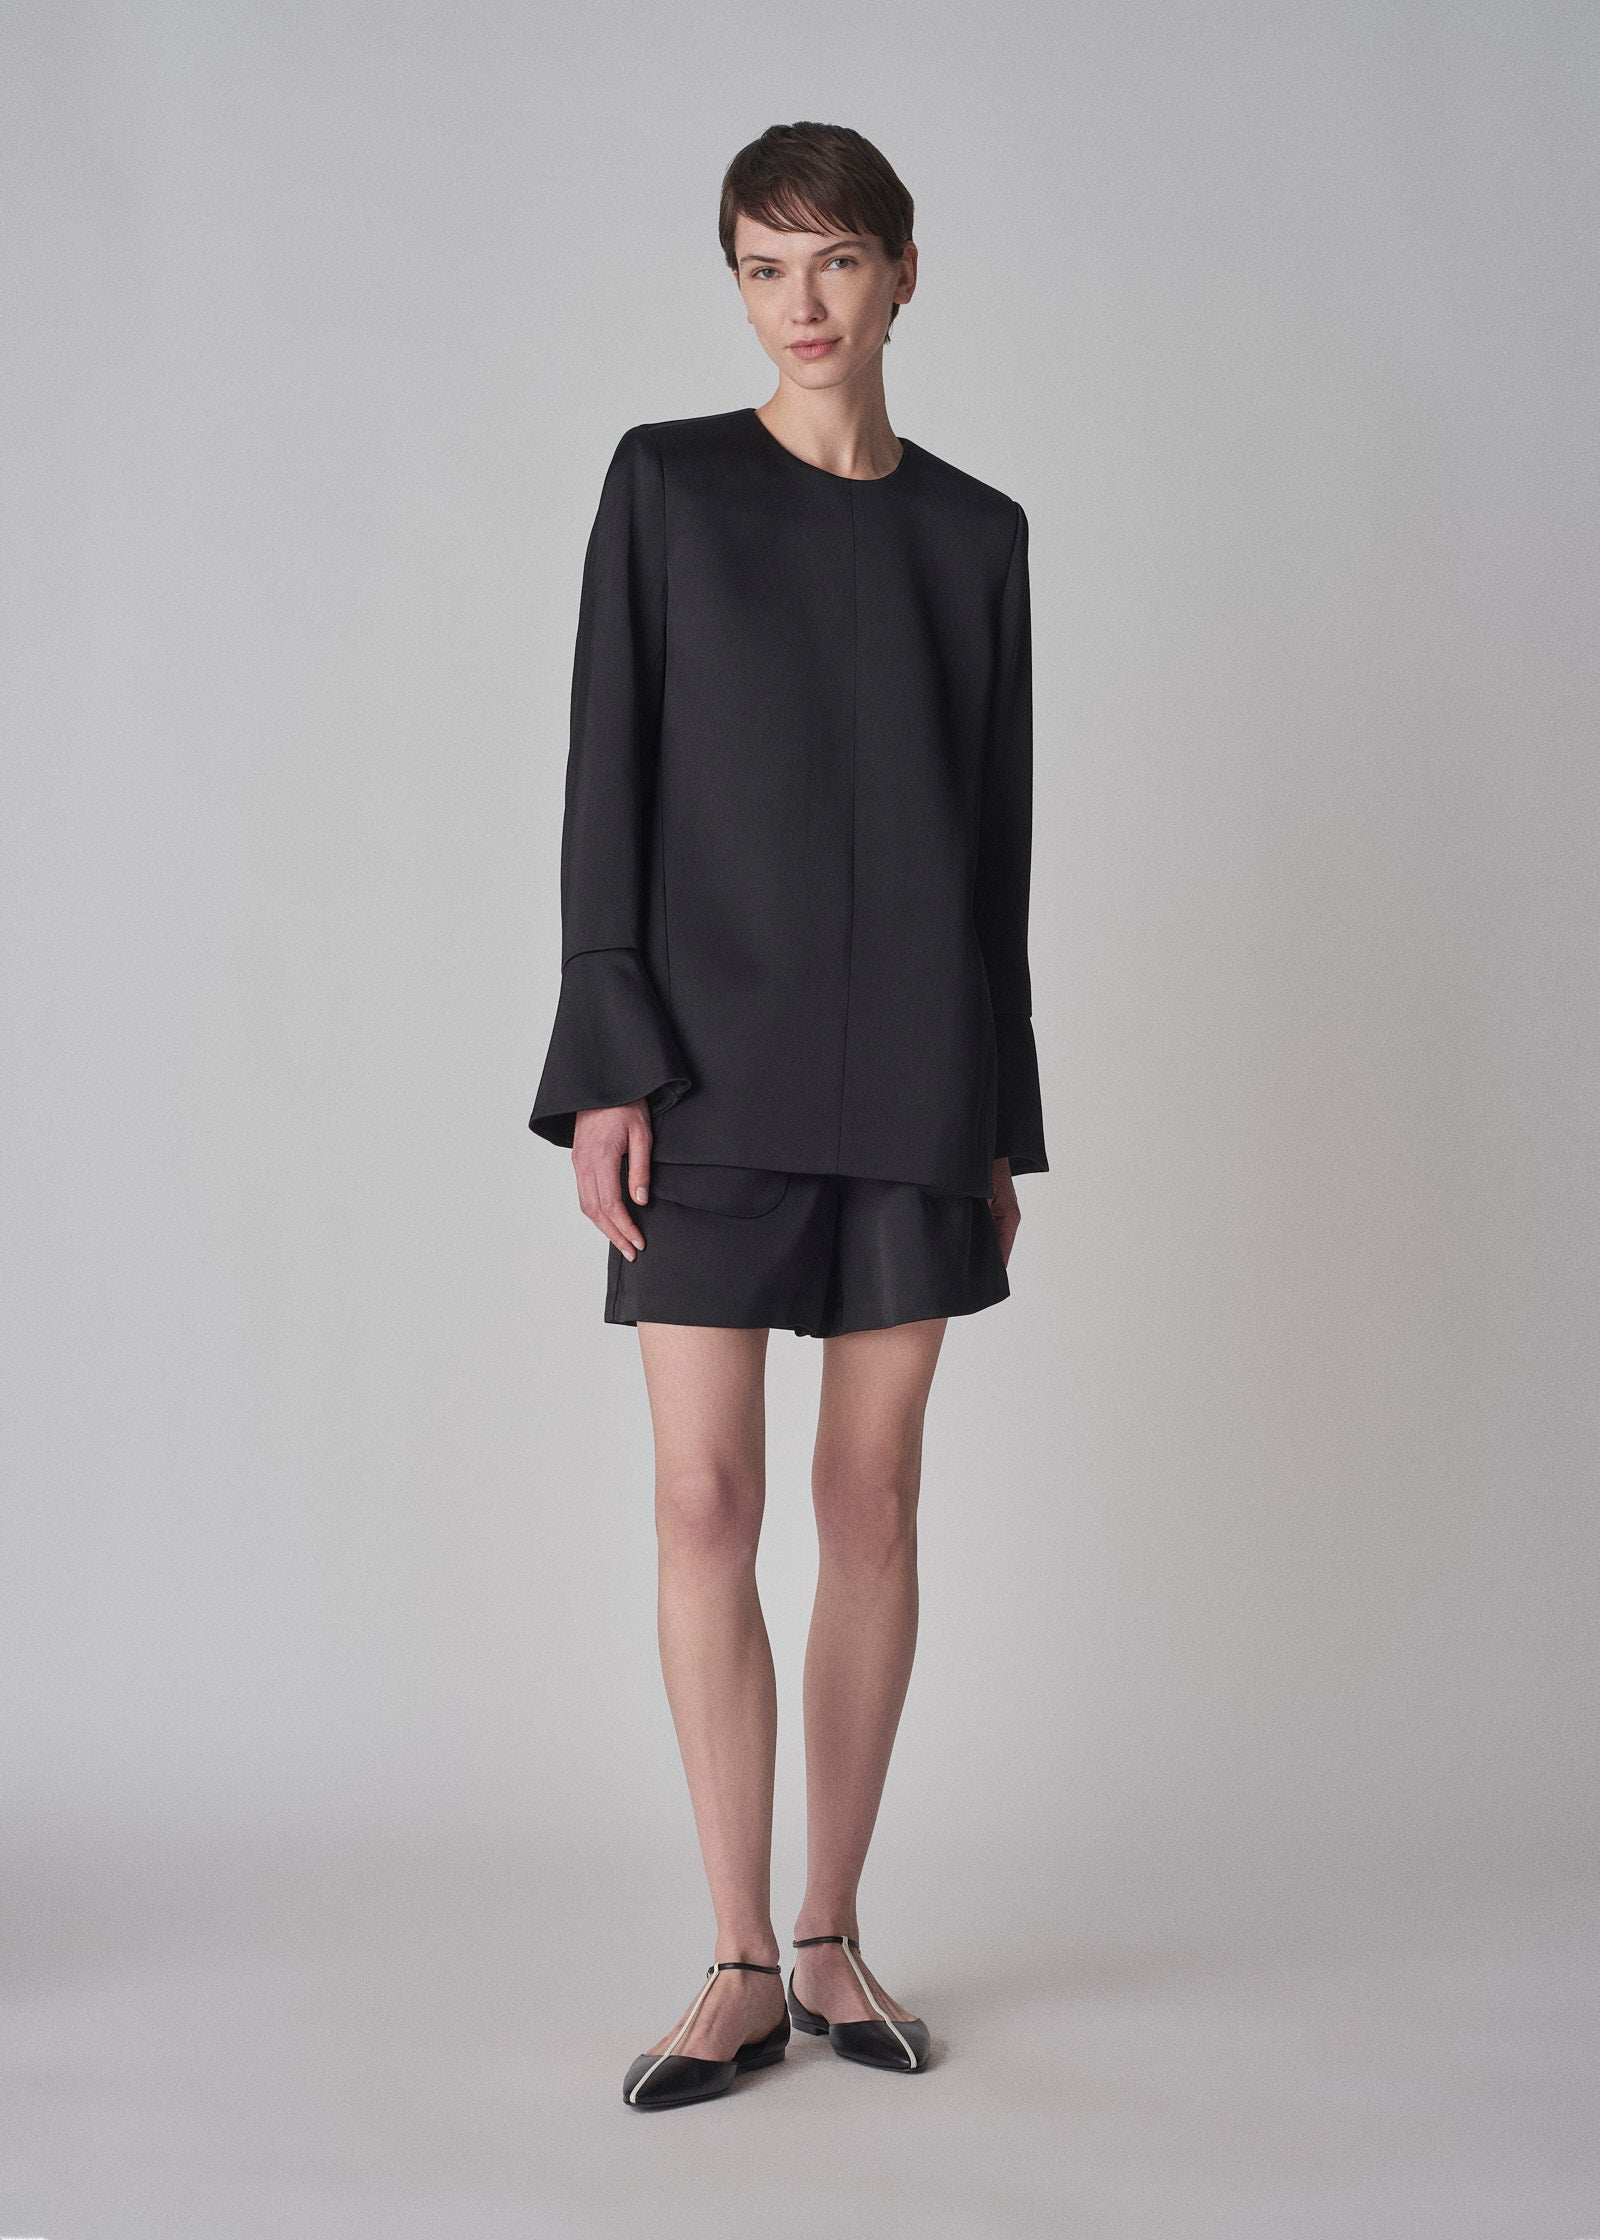 Sack Short in Satin Crepe - Black - CO Collections